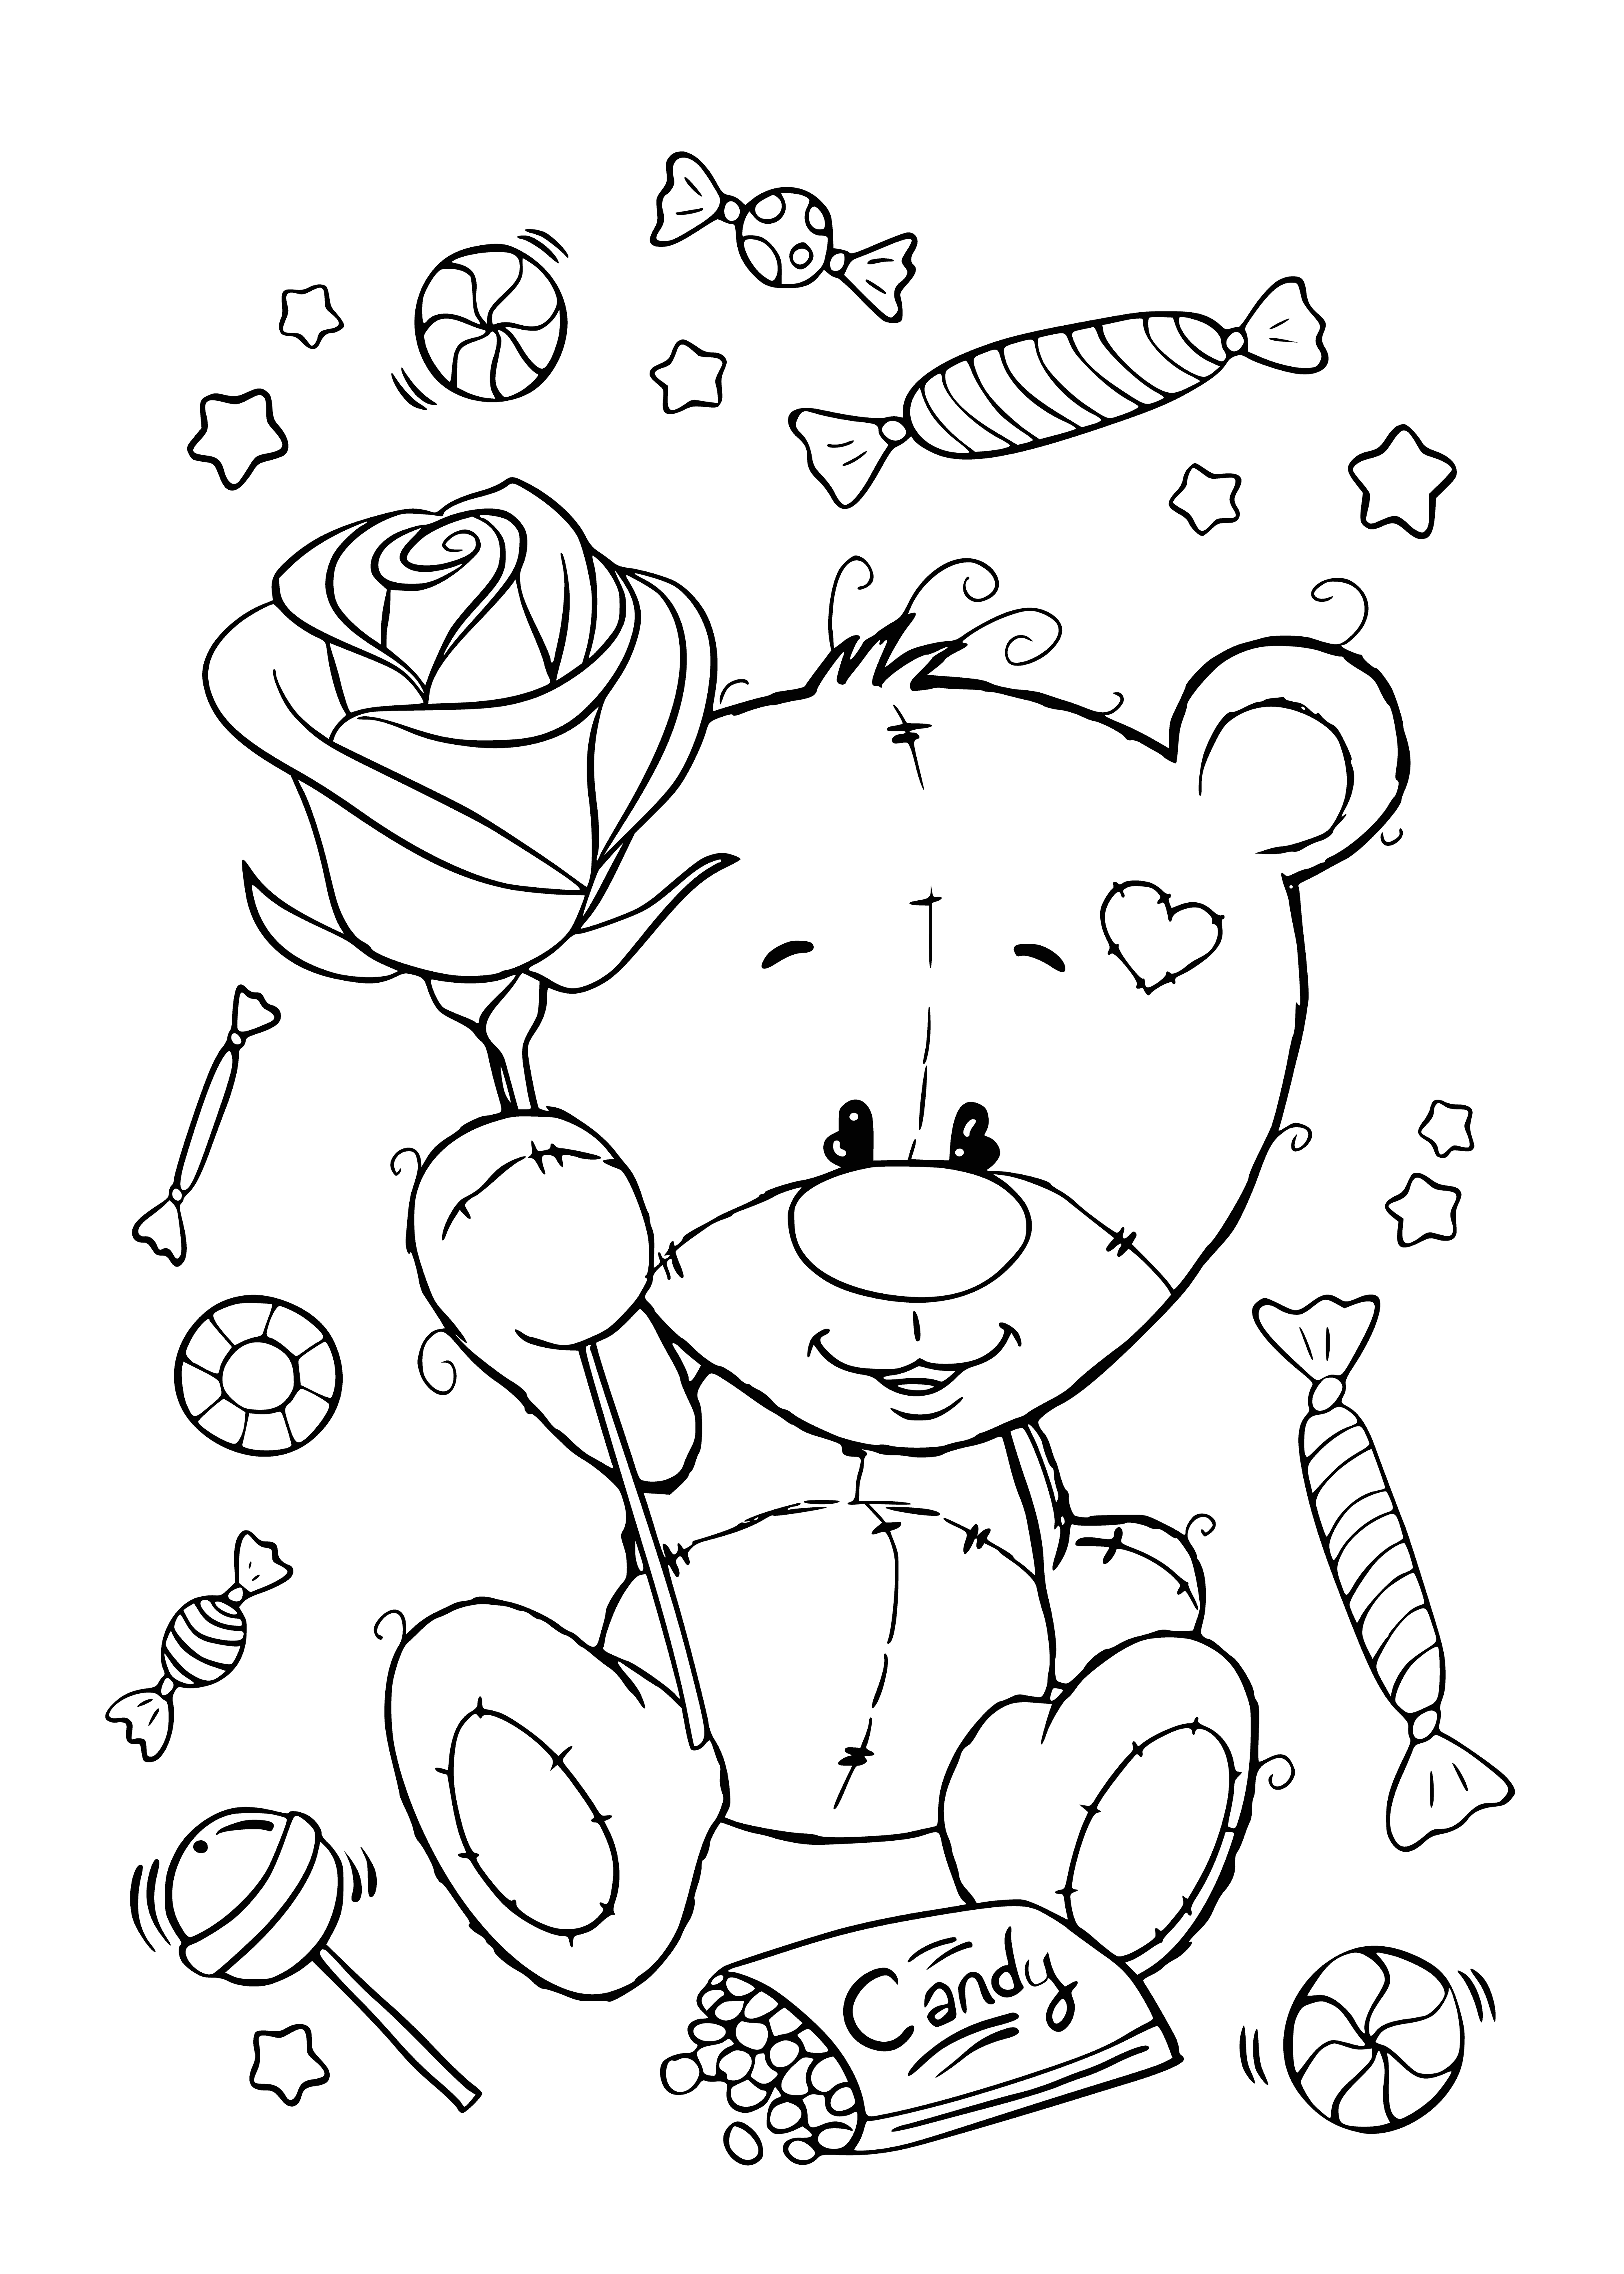 coloring page: A Kawaii Teddy bear holds a rose, with big eyes, a bowtie and a red heart on its chest. #Kawaii #ColoringPage